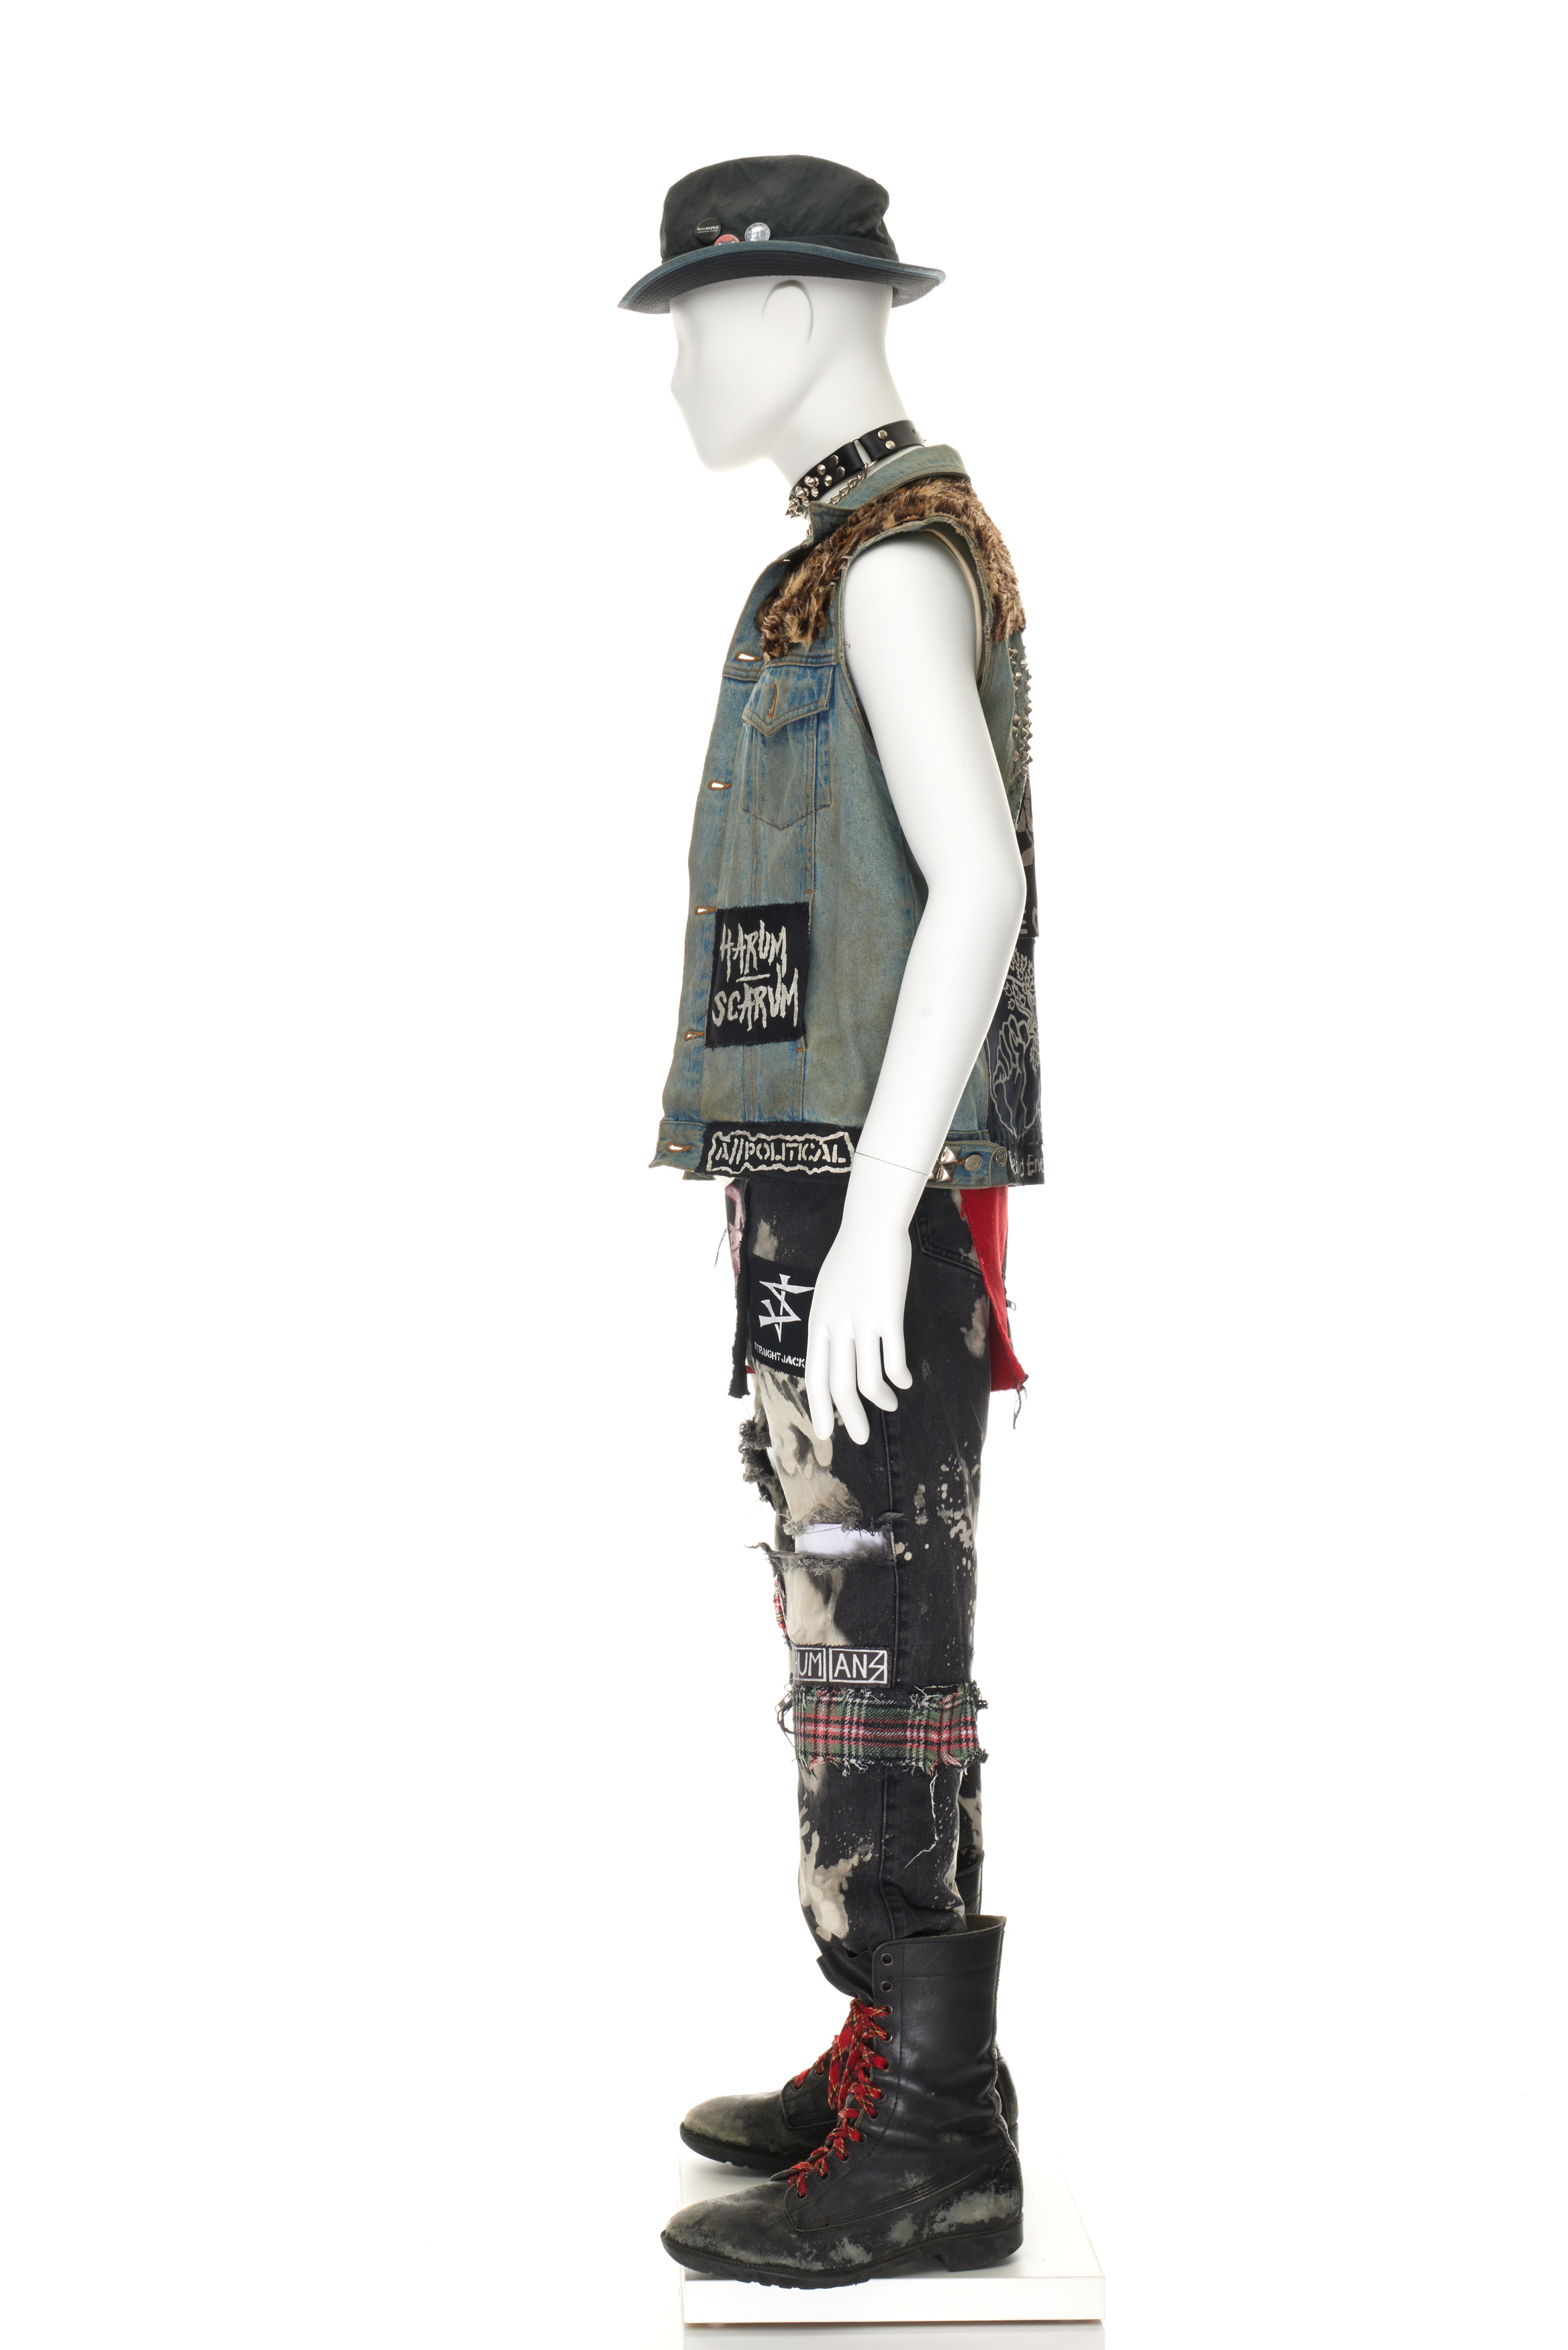 Men's punk outfit remade and worn by Lewis Nicolson.